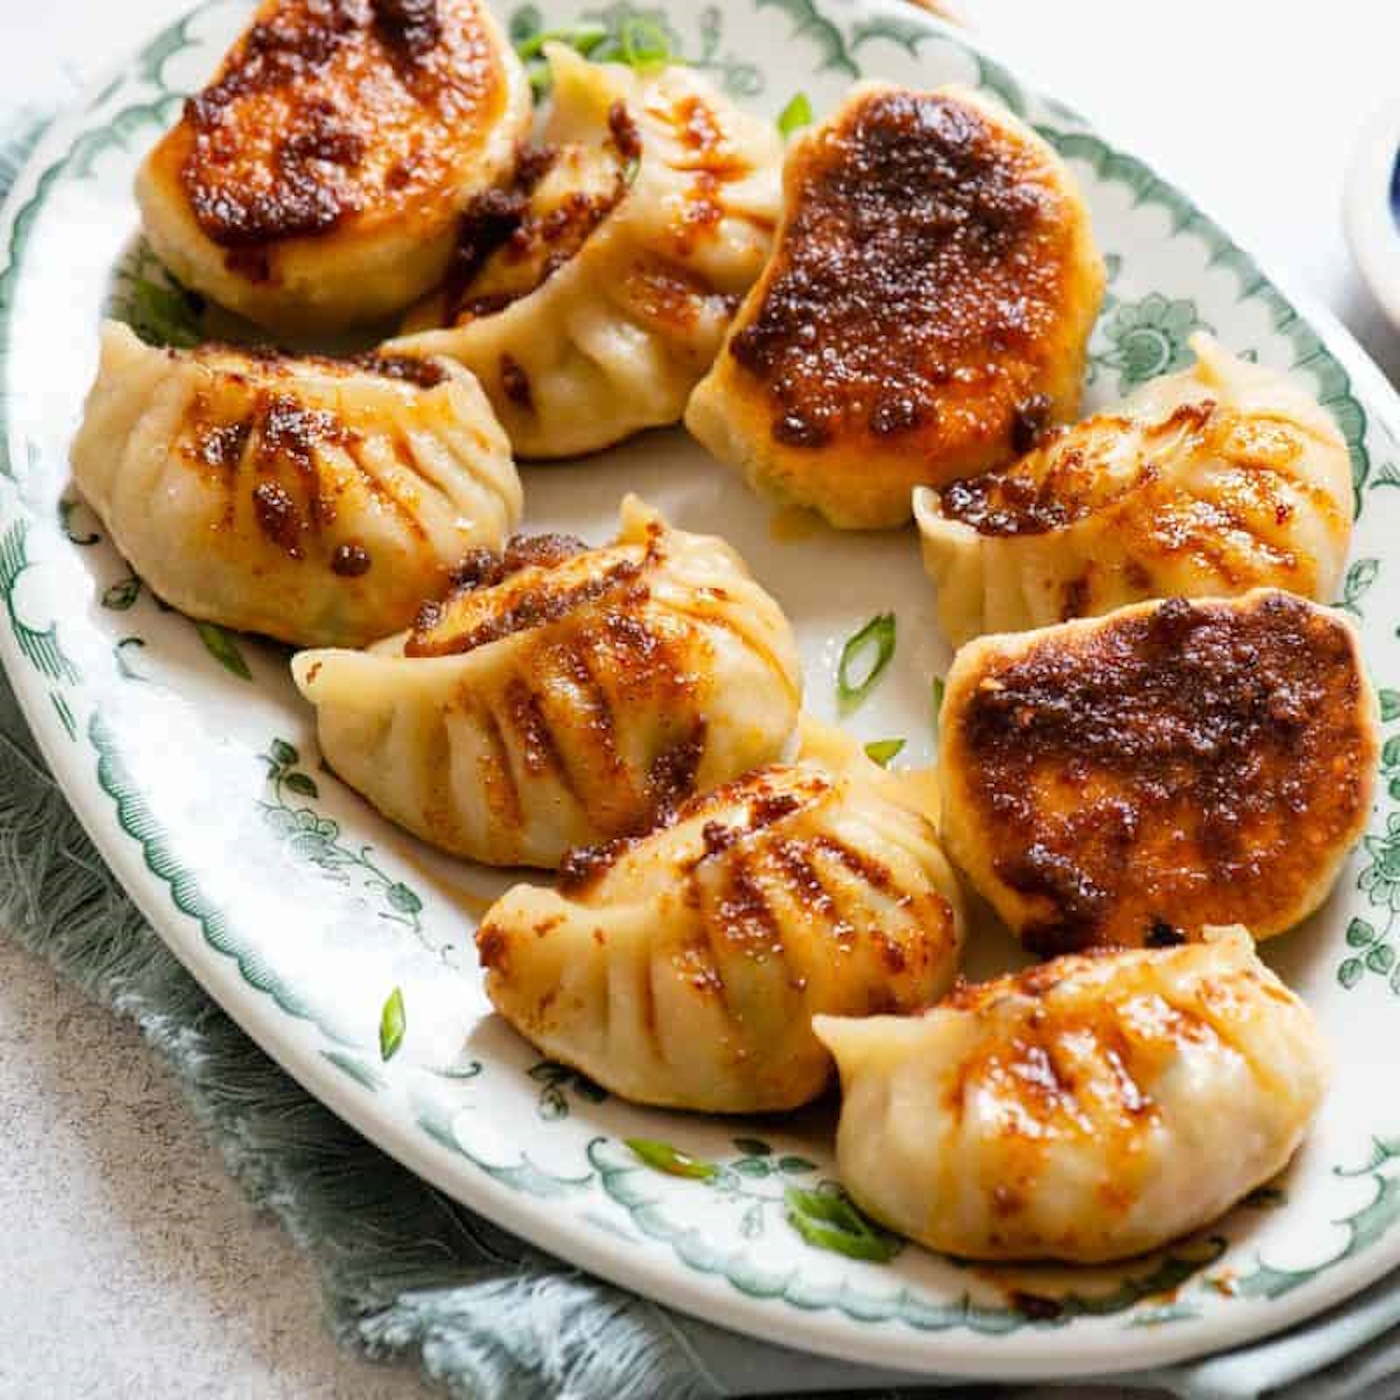 Potstickers with Pork or Vegetables